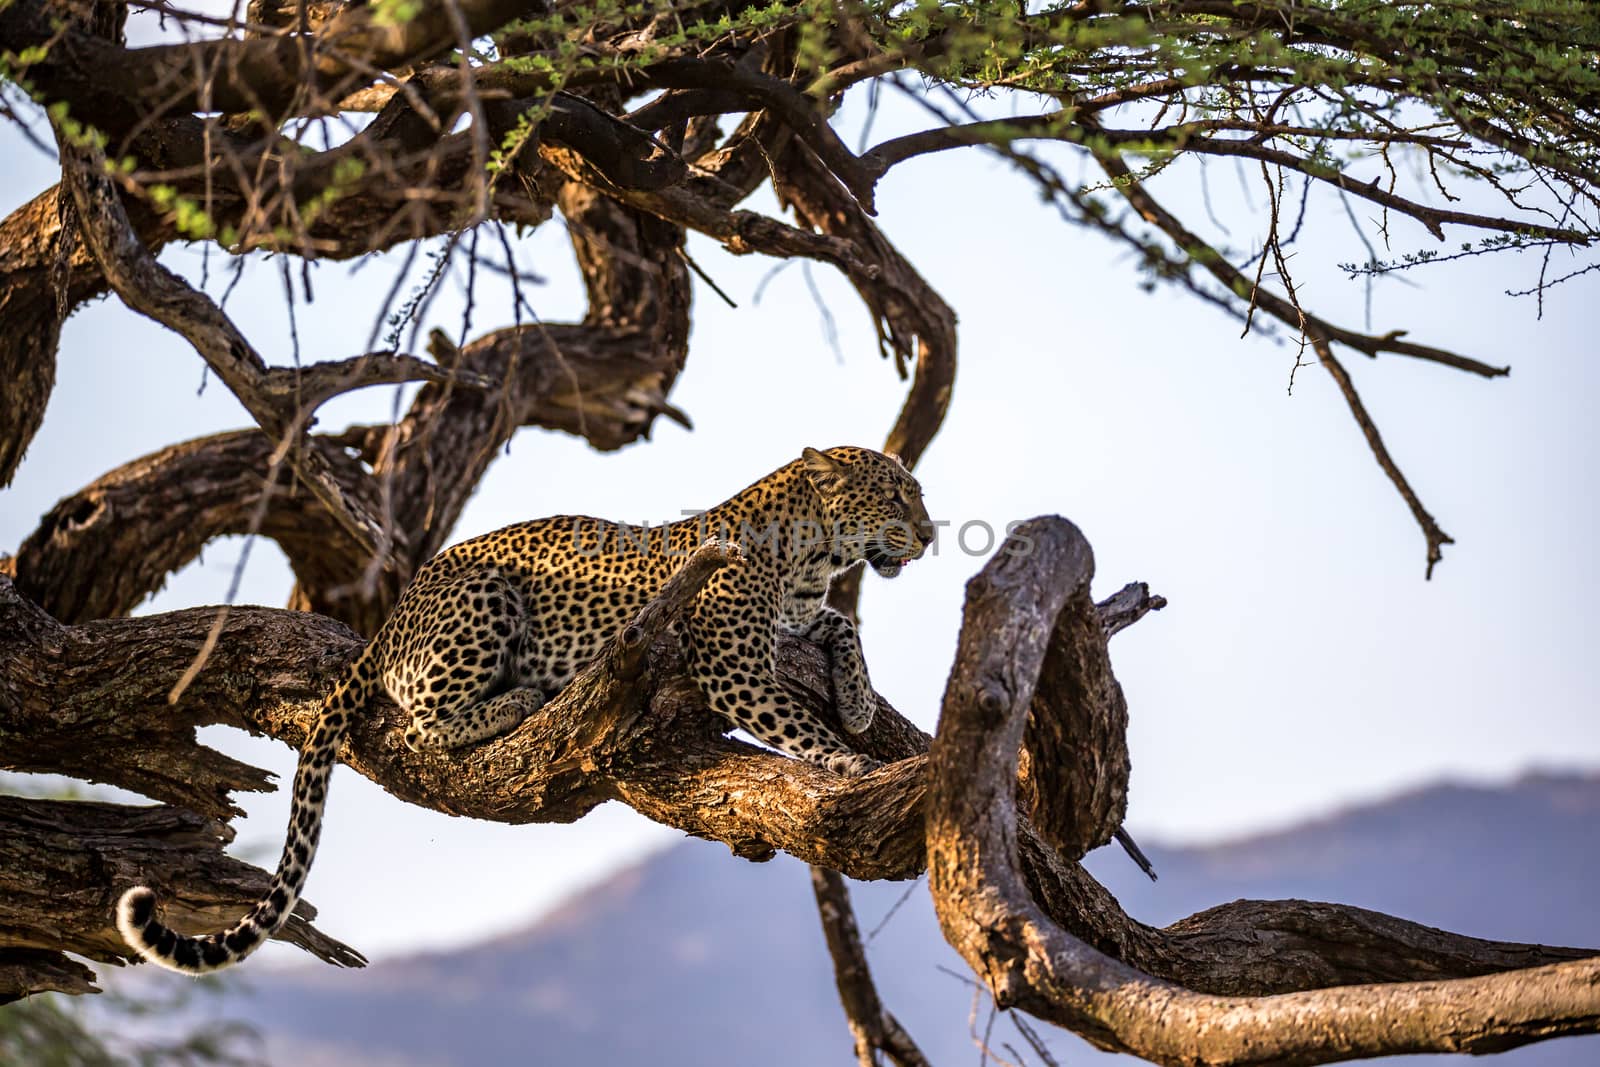 One leopard rests on the branch of a tree